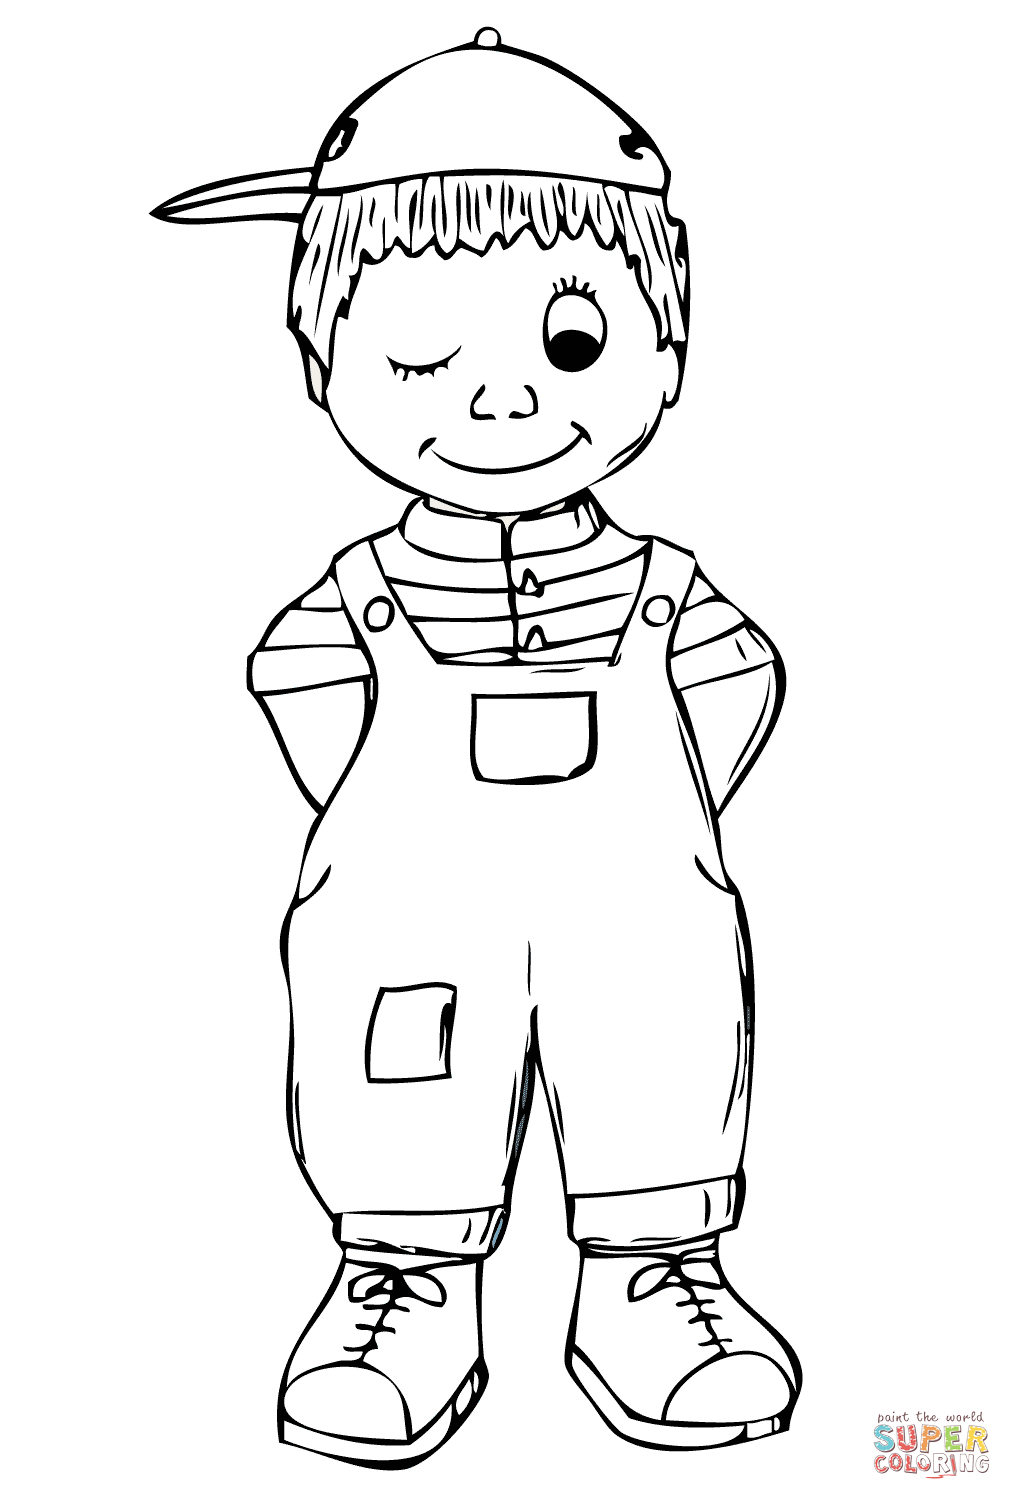 Boy coloring page | Free Printable Coloring Pages